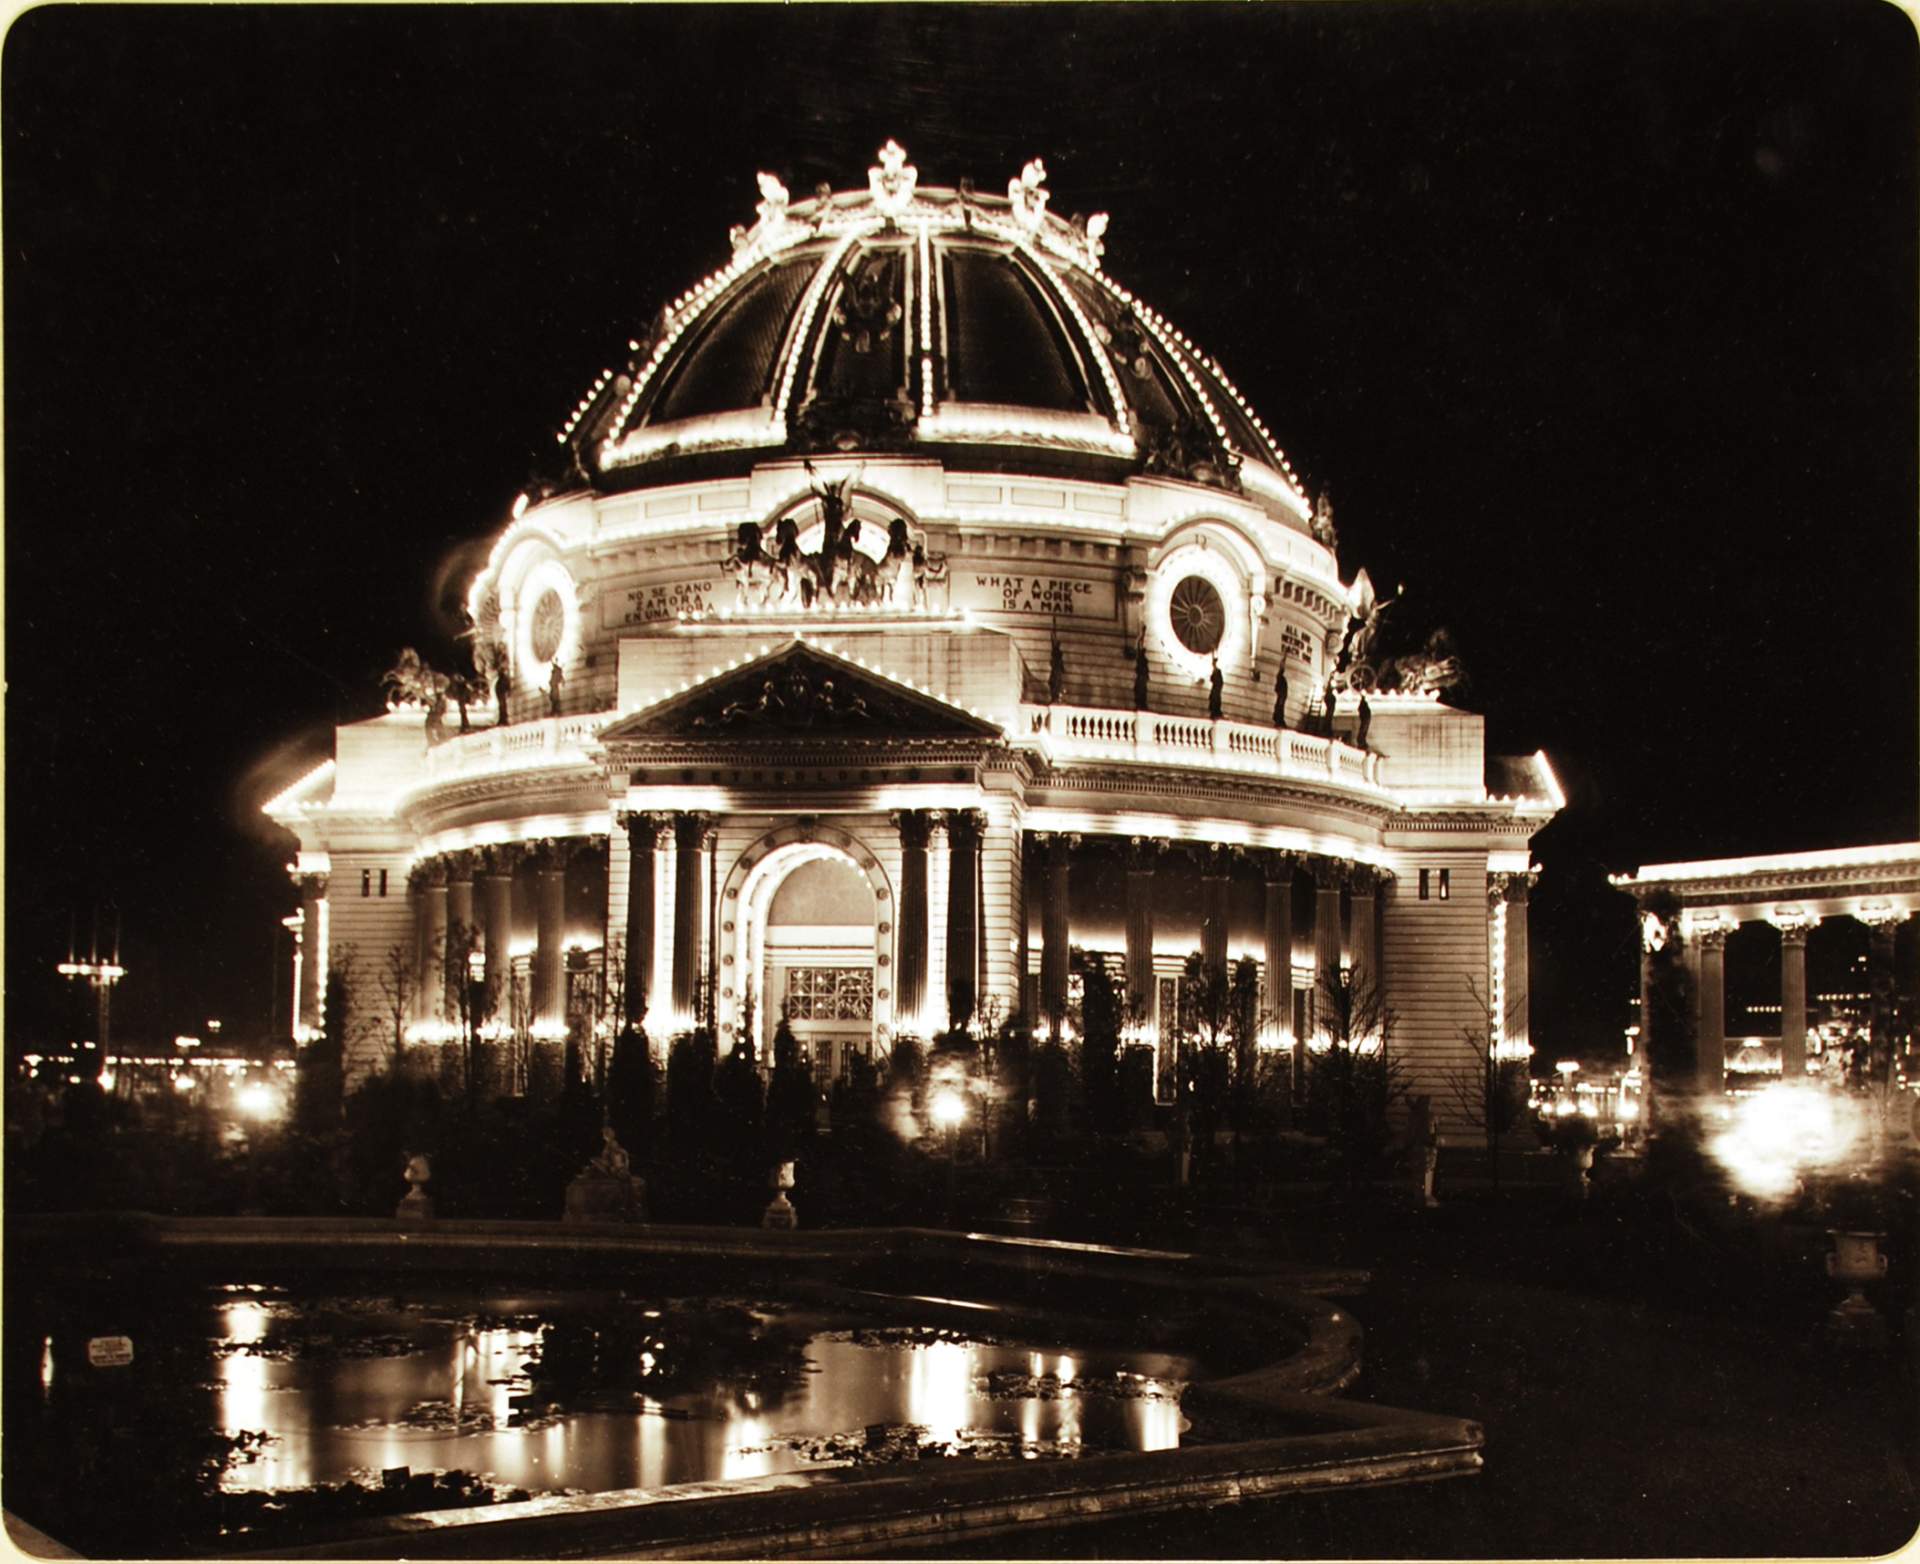 Ethnology Building at Night